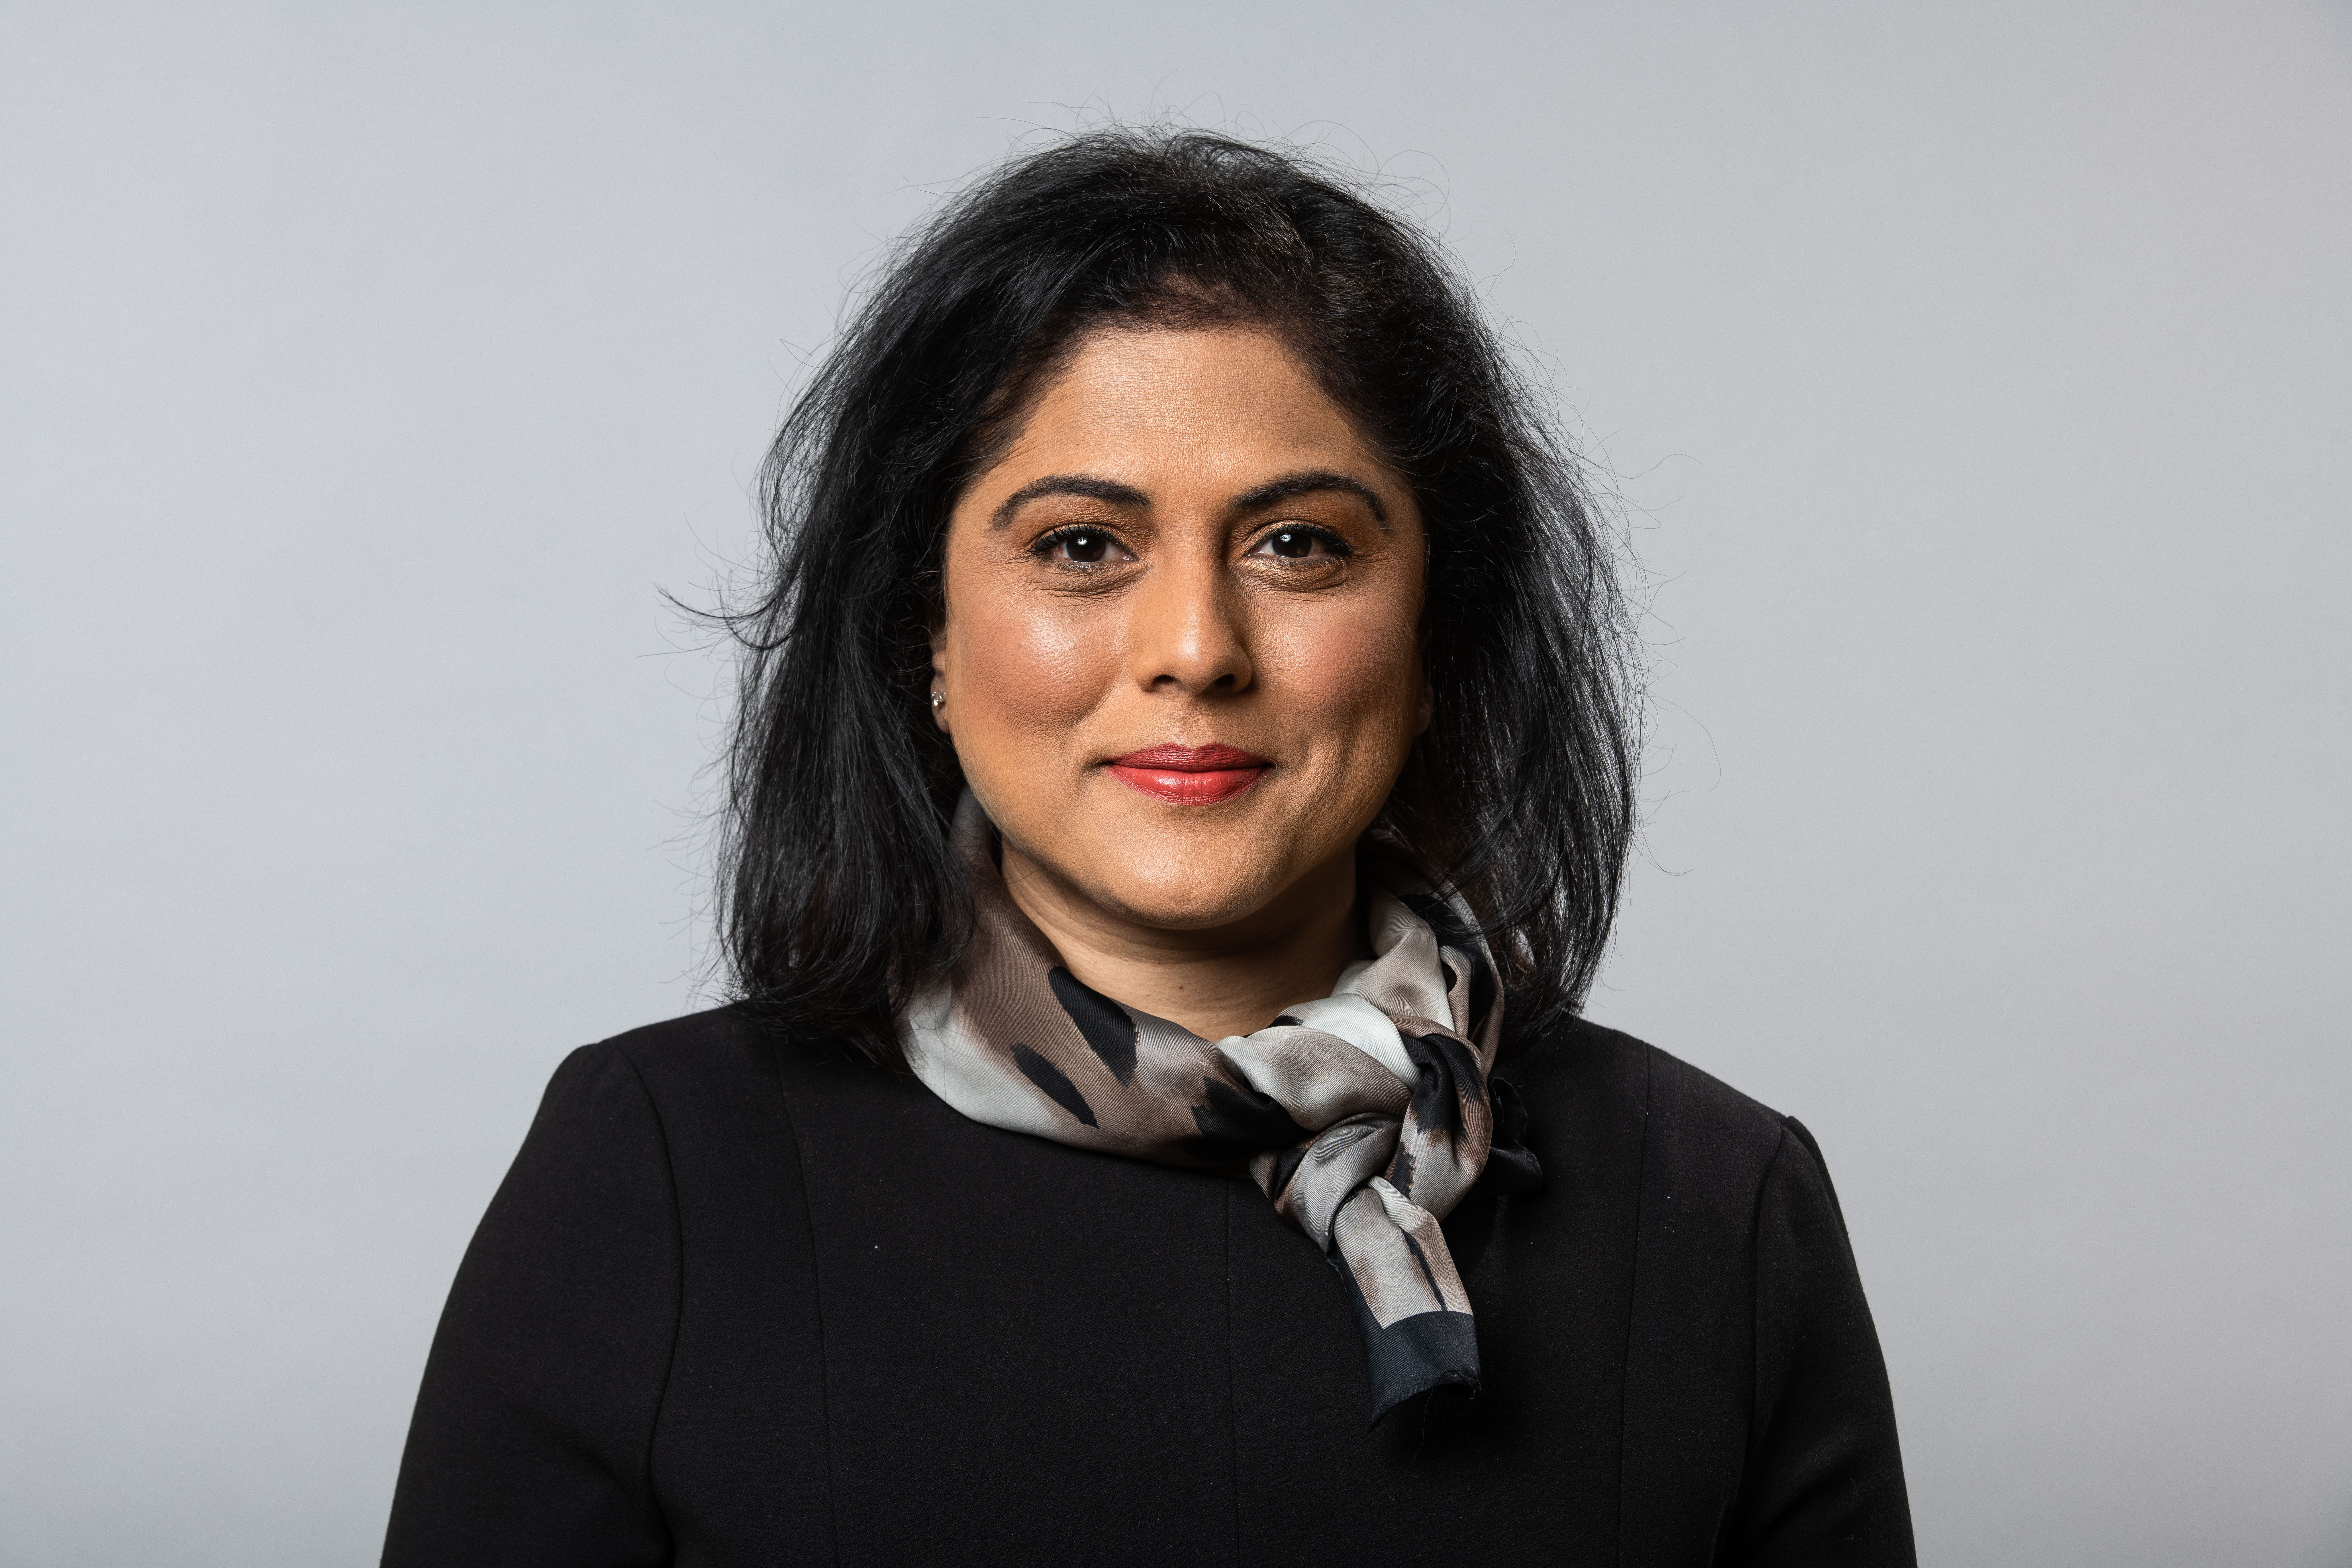 KPMG UK elects Bina Mehta as chair for extended term